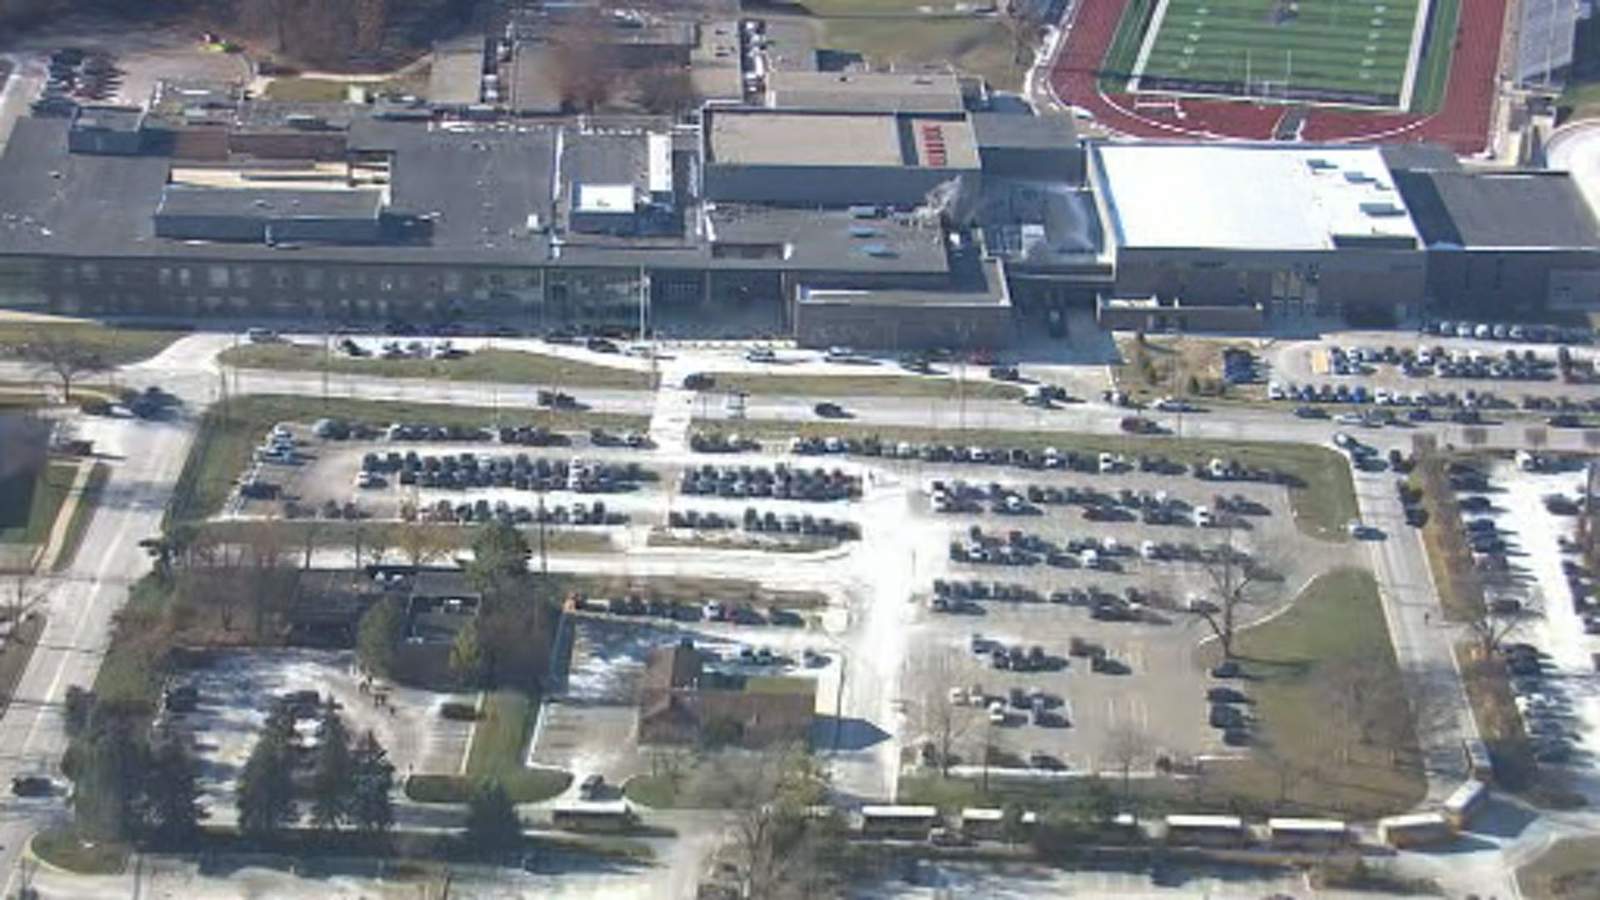 Police give all-clear after false alarm at Bloomfield Hills High School